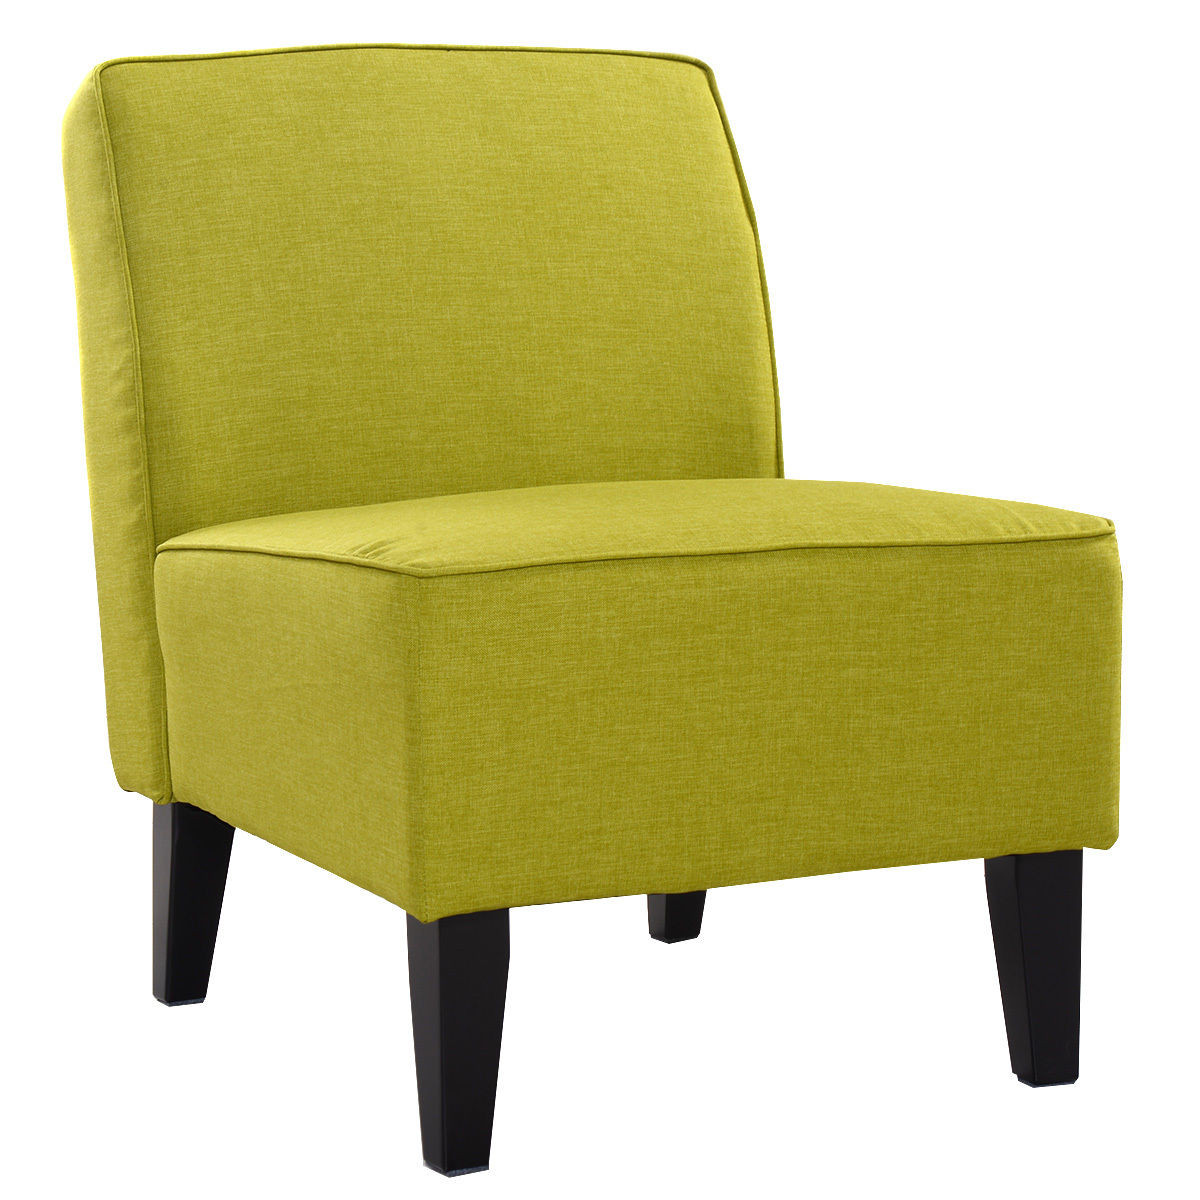 Armless Living Room Chairs
 Deco Accent Chair Solid Armless Living Room Bedroom fice